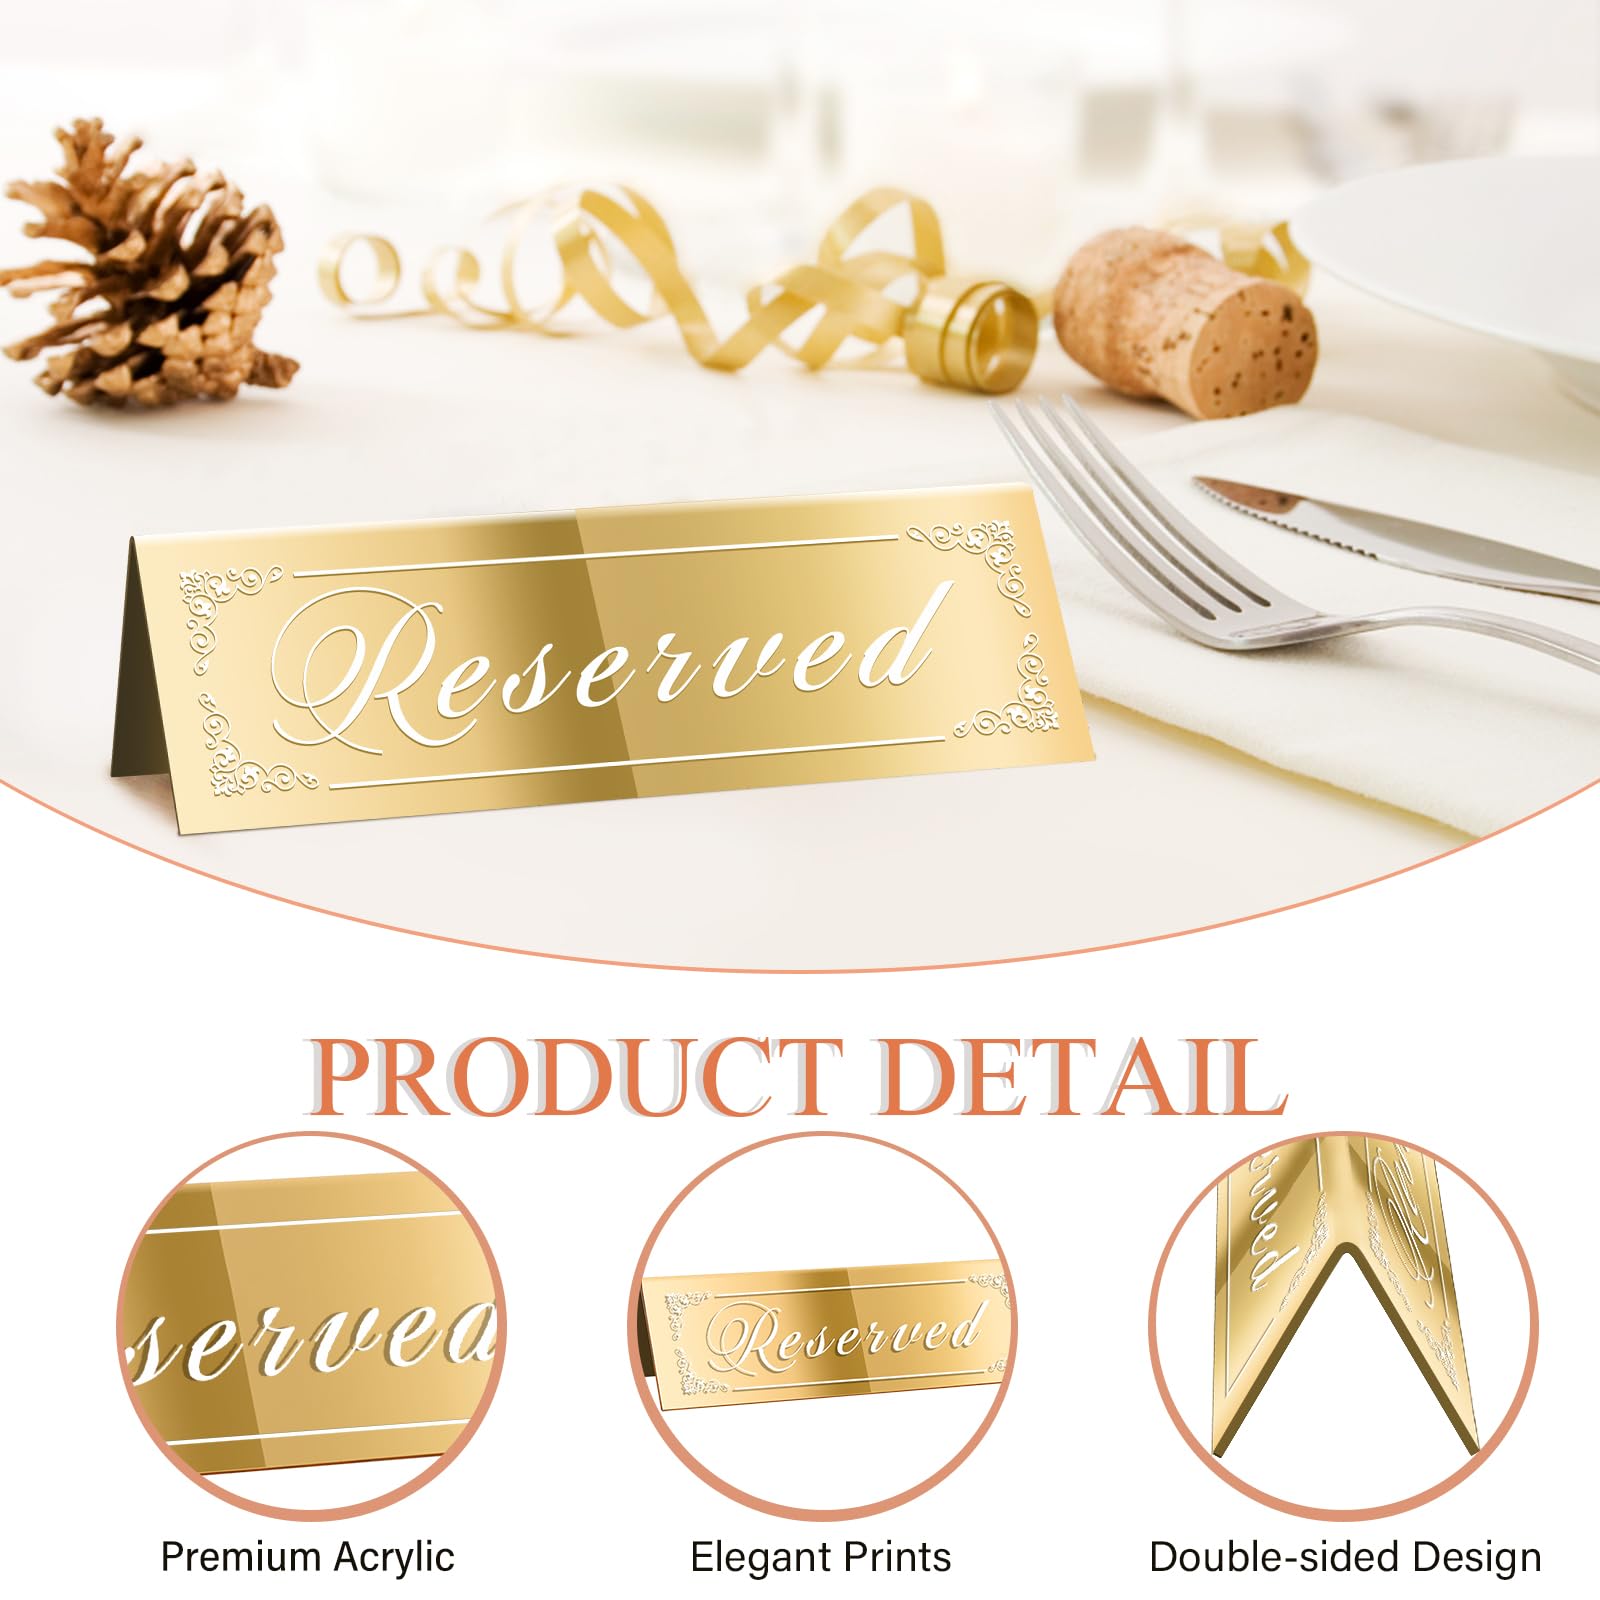 CWJCYTNSN 12PCS Reserved Table Signs, Gold Reserved Signs for Wedding, Acrylic Double-side Reserved Seating Signs, Mirrored Guest Reservation Table Tent Signs for Birthday Party, Event, Restaurant